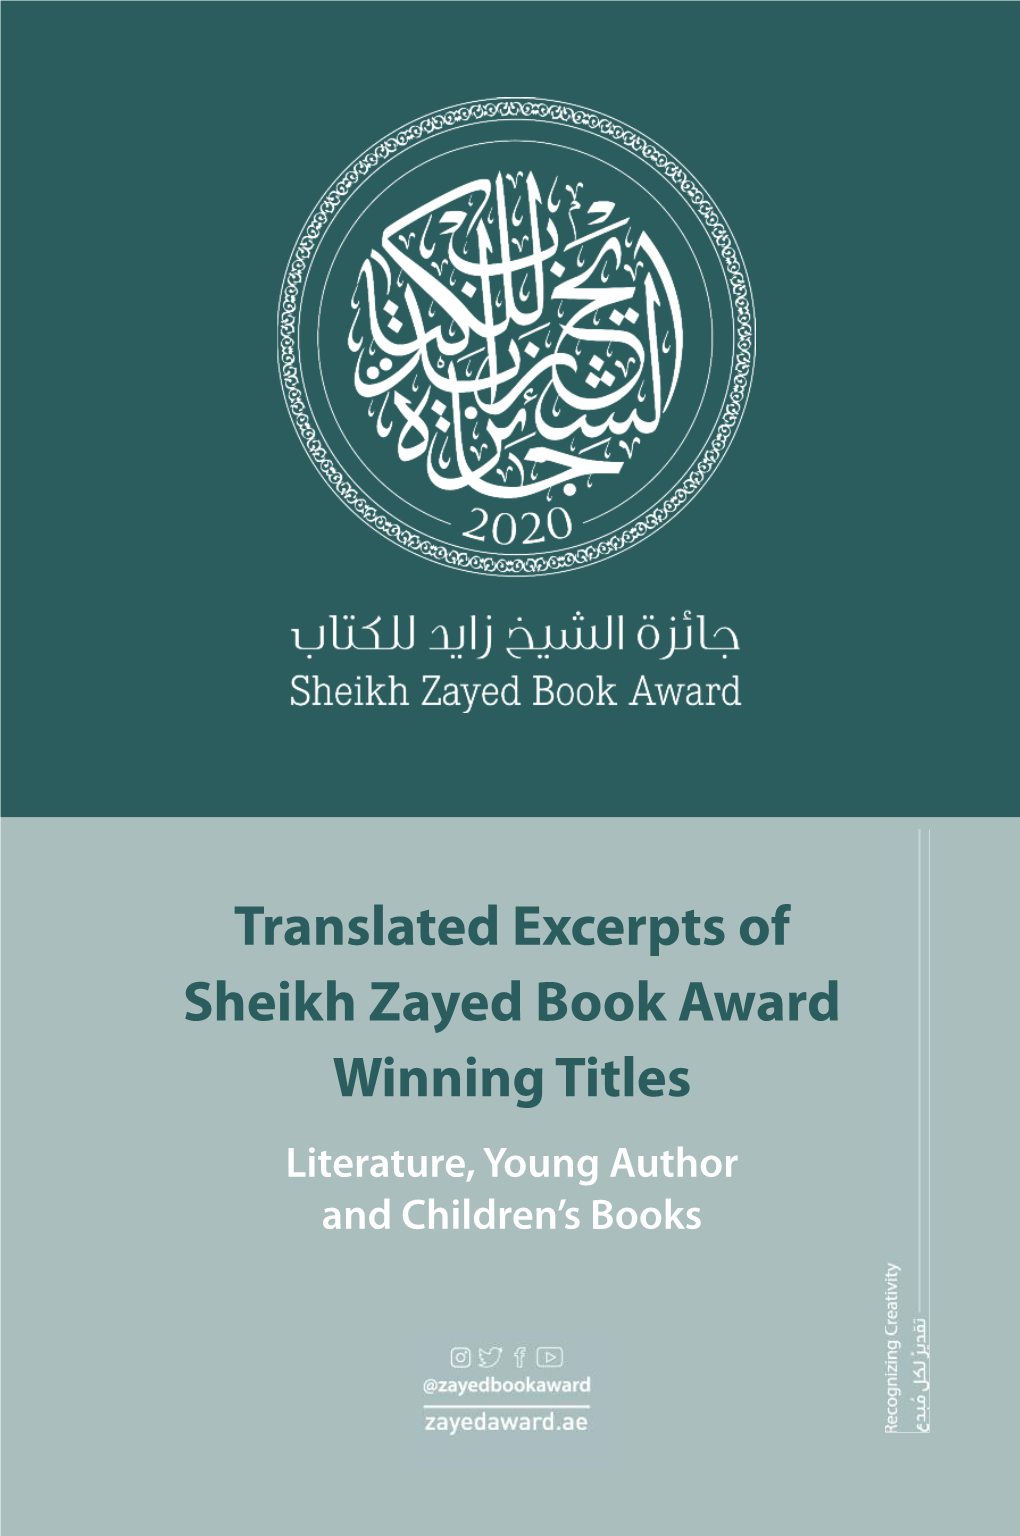 2020 Translated Excerpts of Sheikh Zayed Book Award Winning Titles